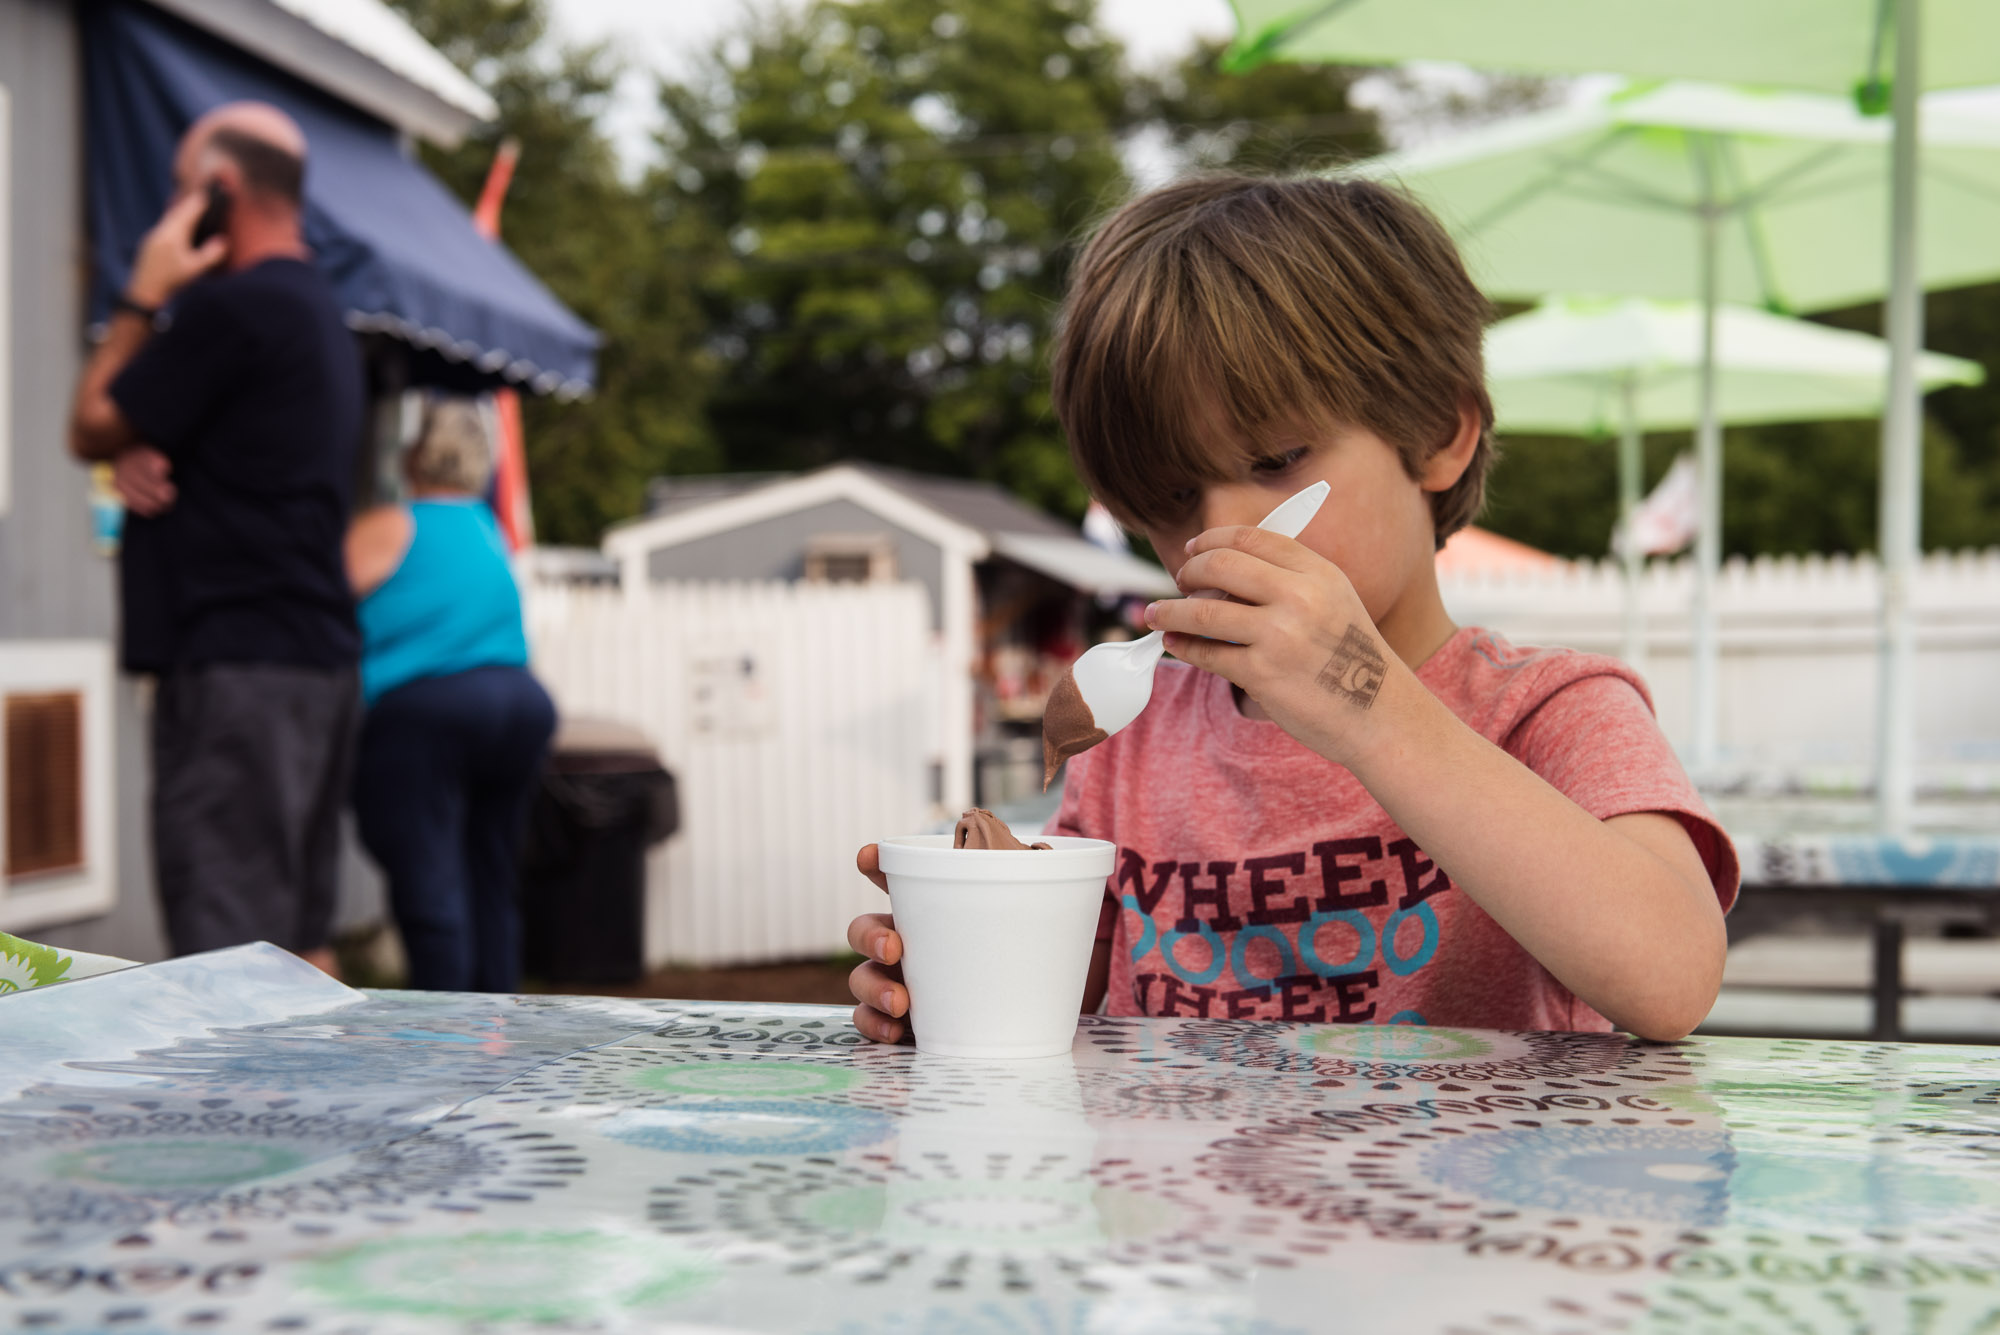 child eating ice cream at creemee stand in vermont picture by megan cieloha